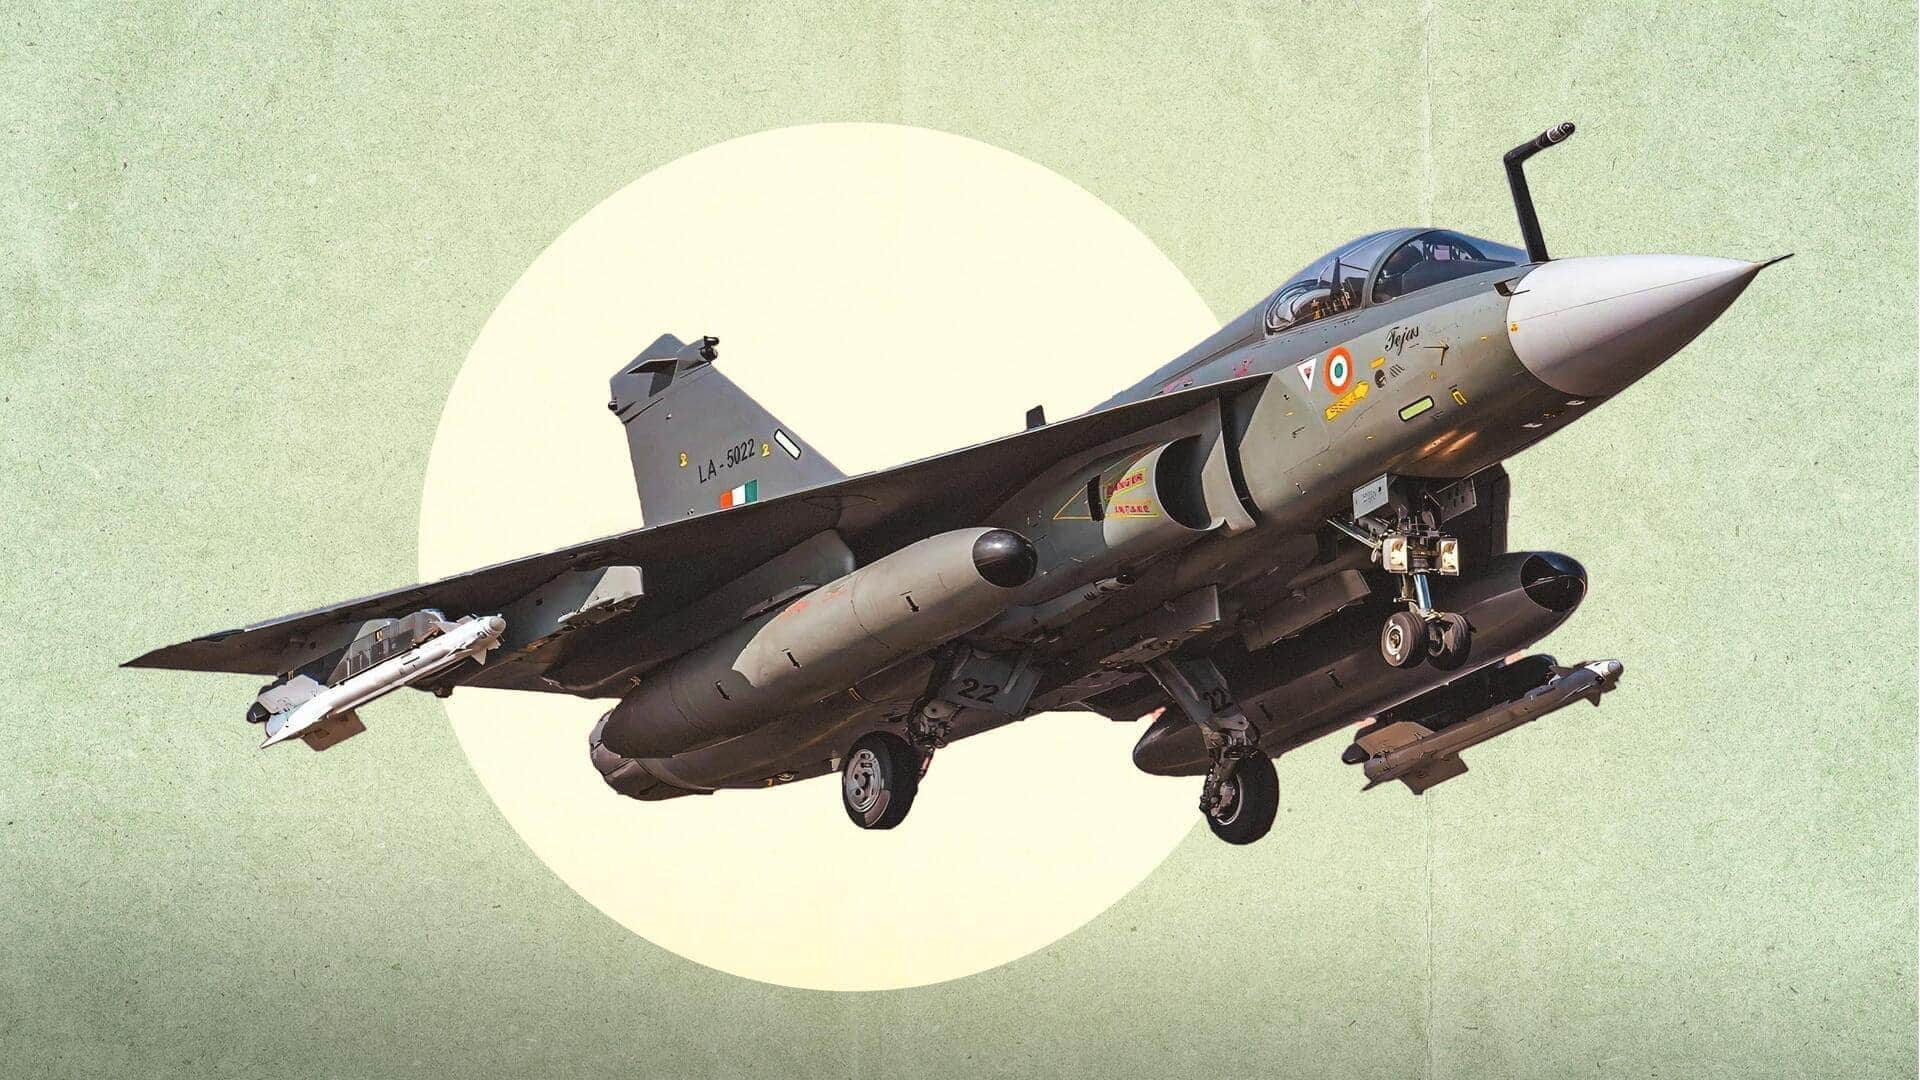 Tejas crash: Everything to know about India's indigenous fighter jet